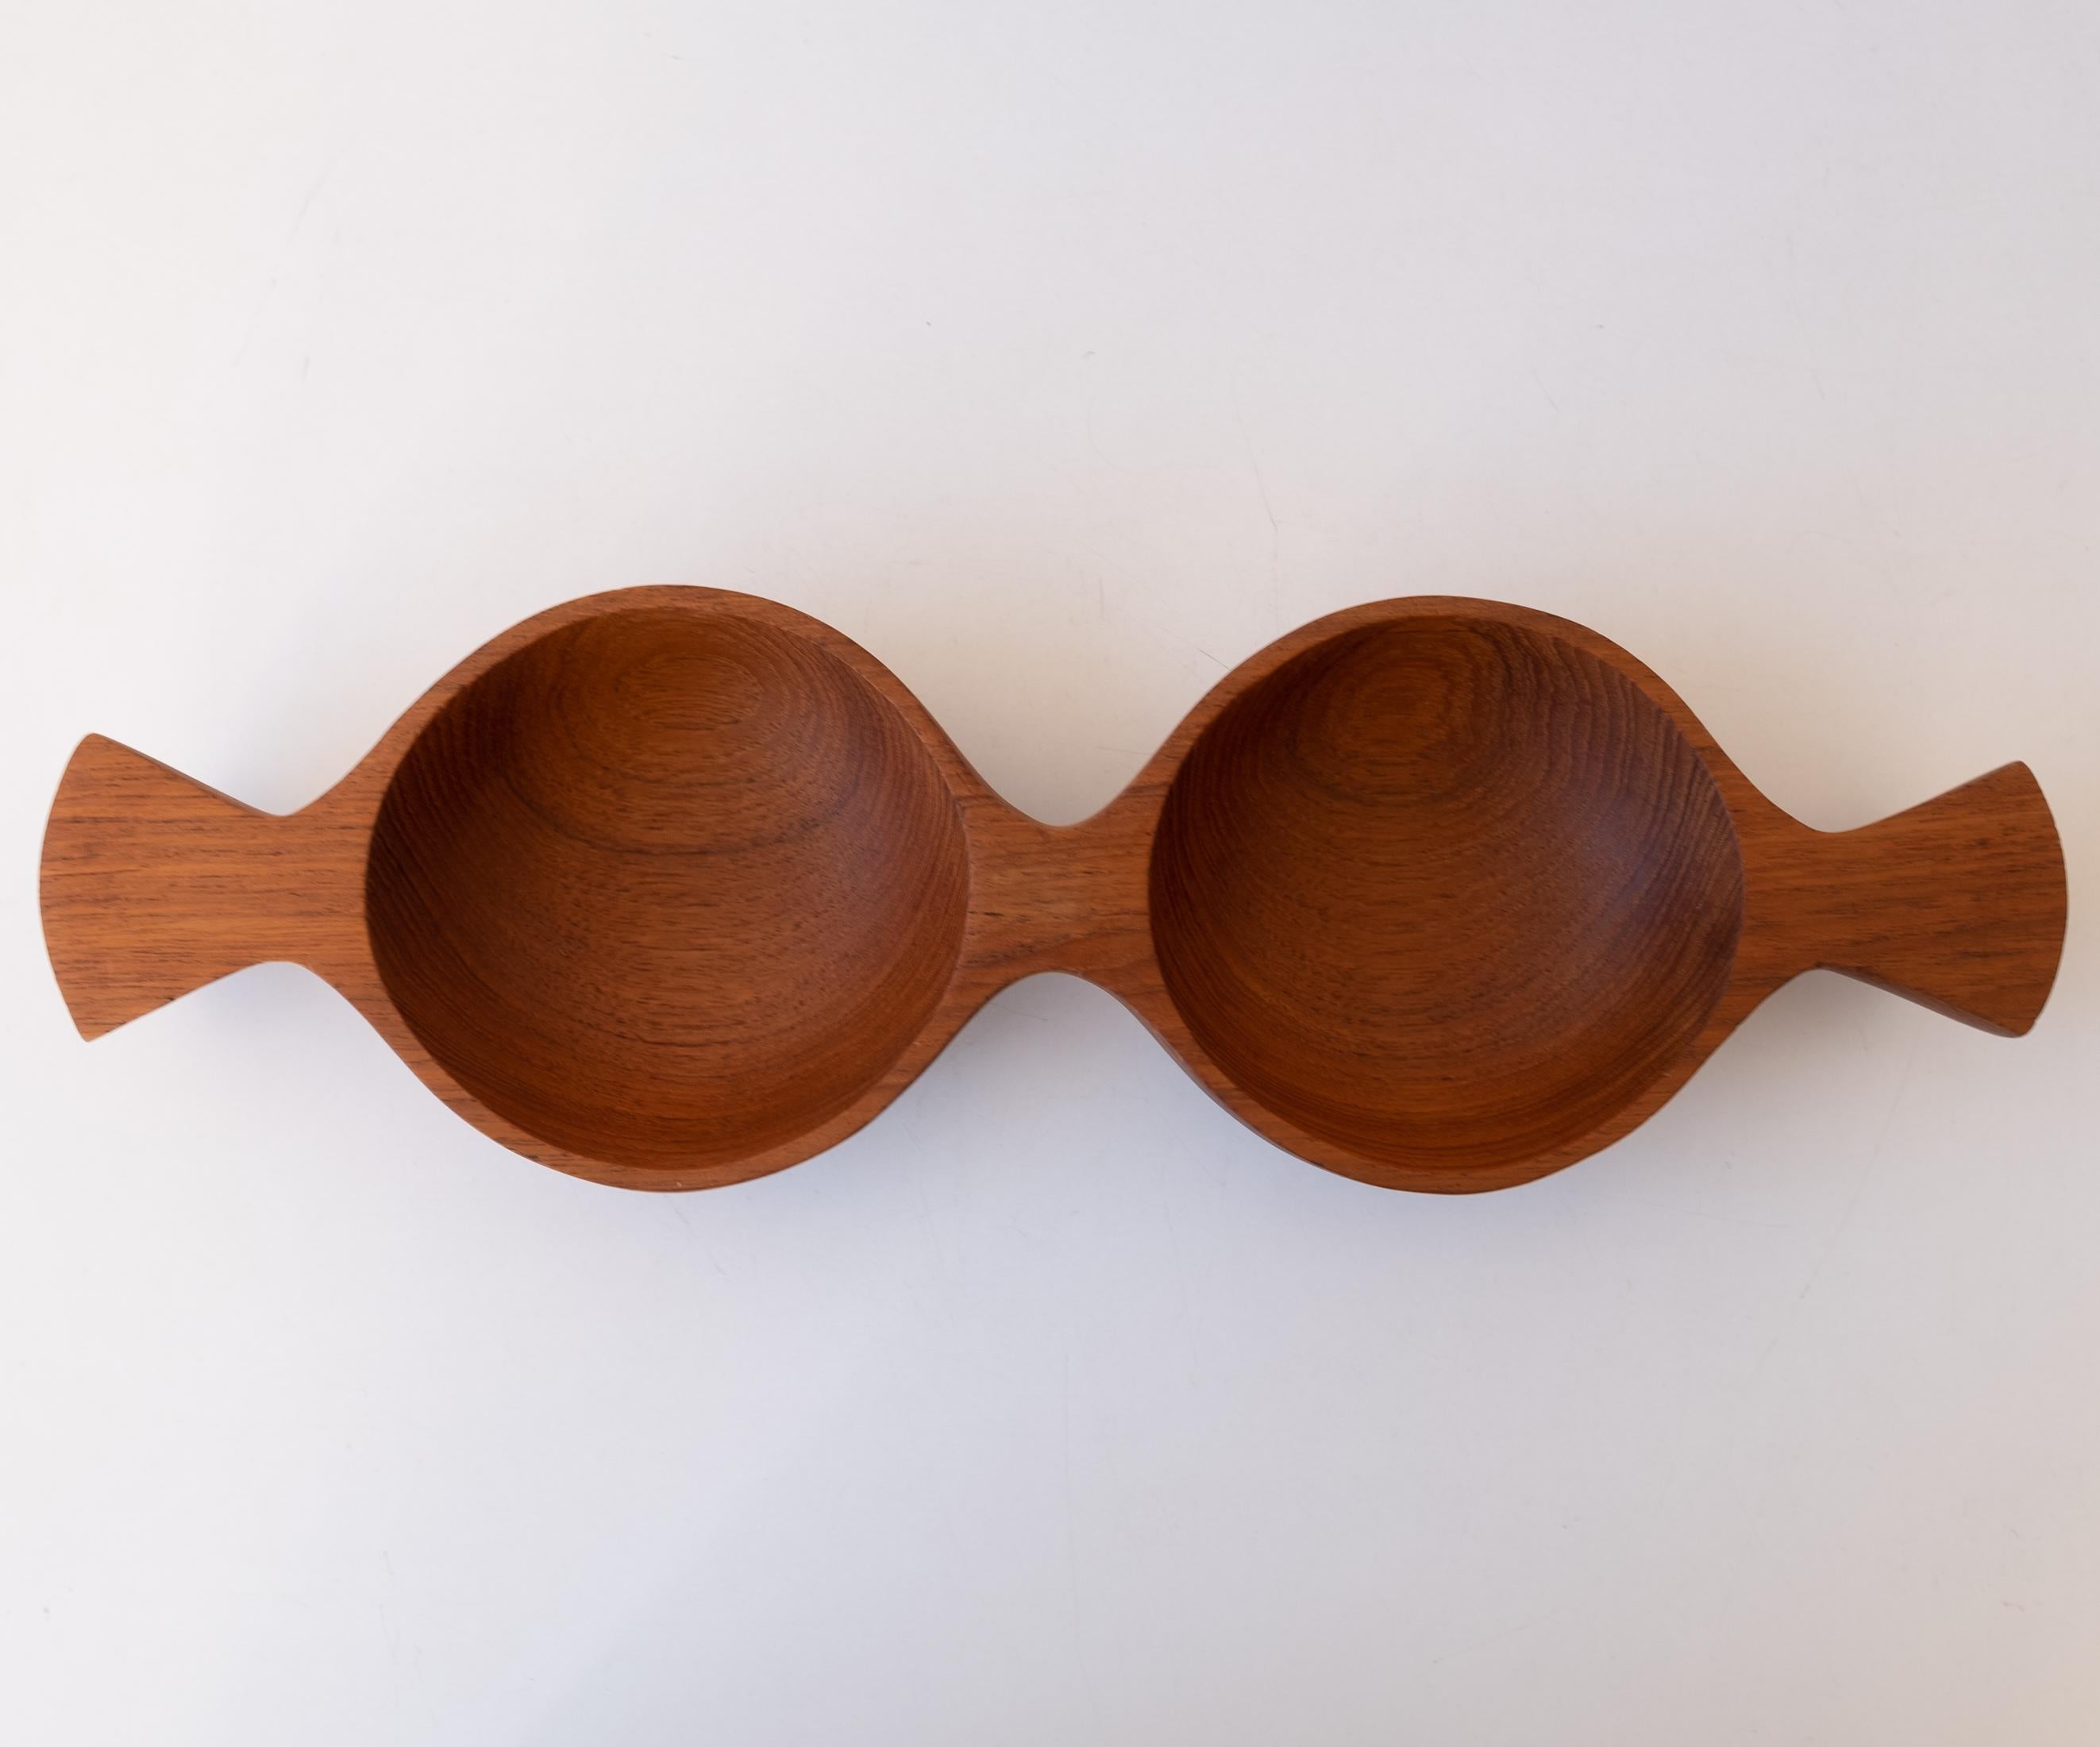 Danish modern catch all or nut bowl. Sculptural design in solid teak. Beautiful form from the mid-century. Denmark, 1950s.